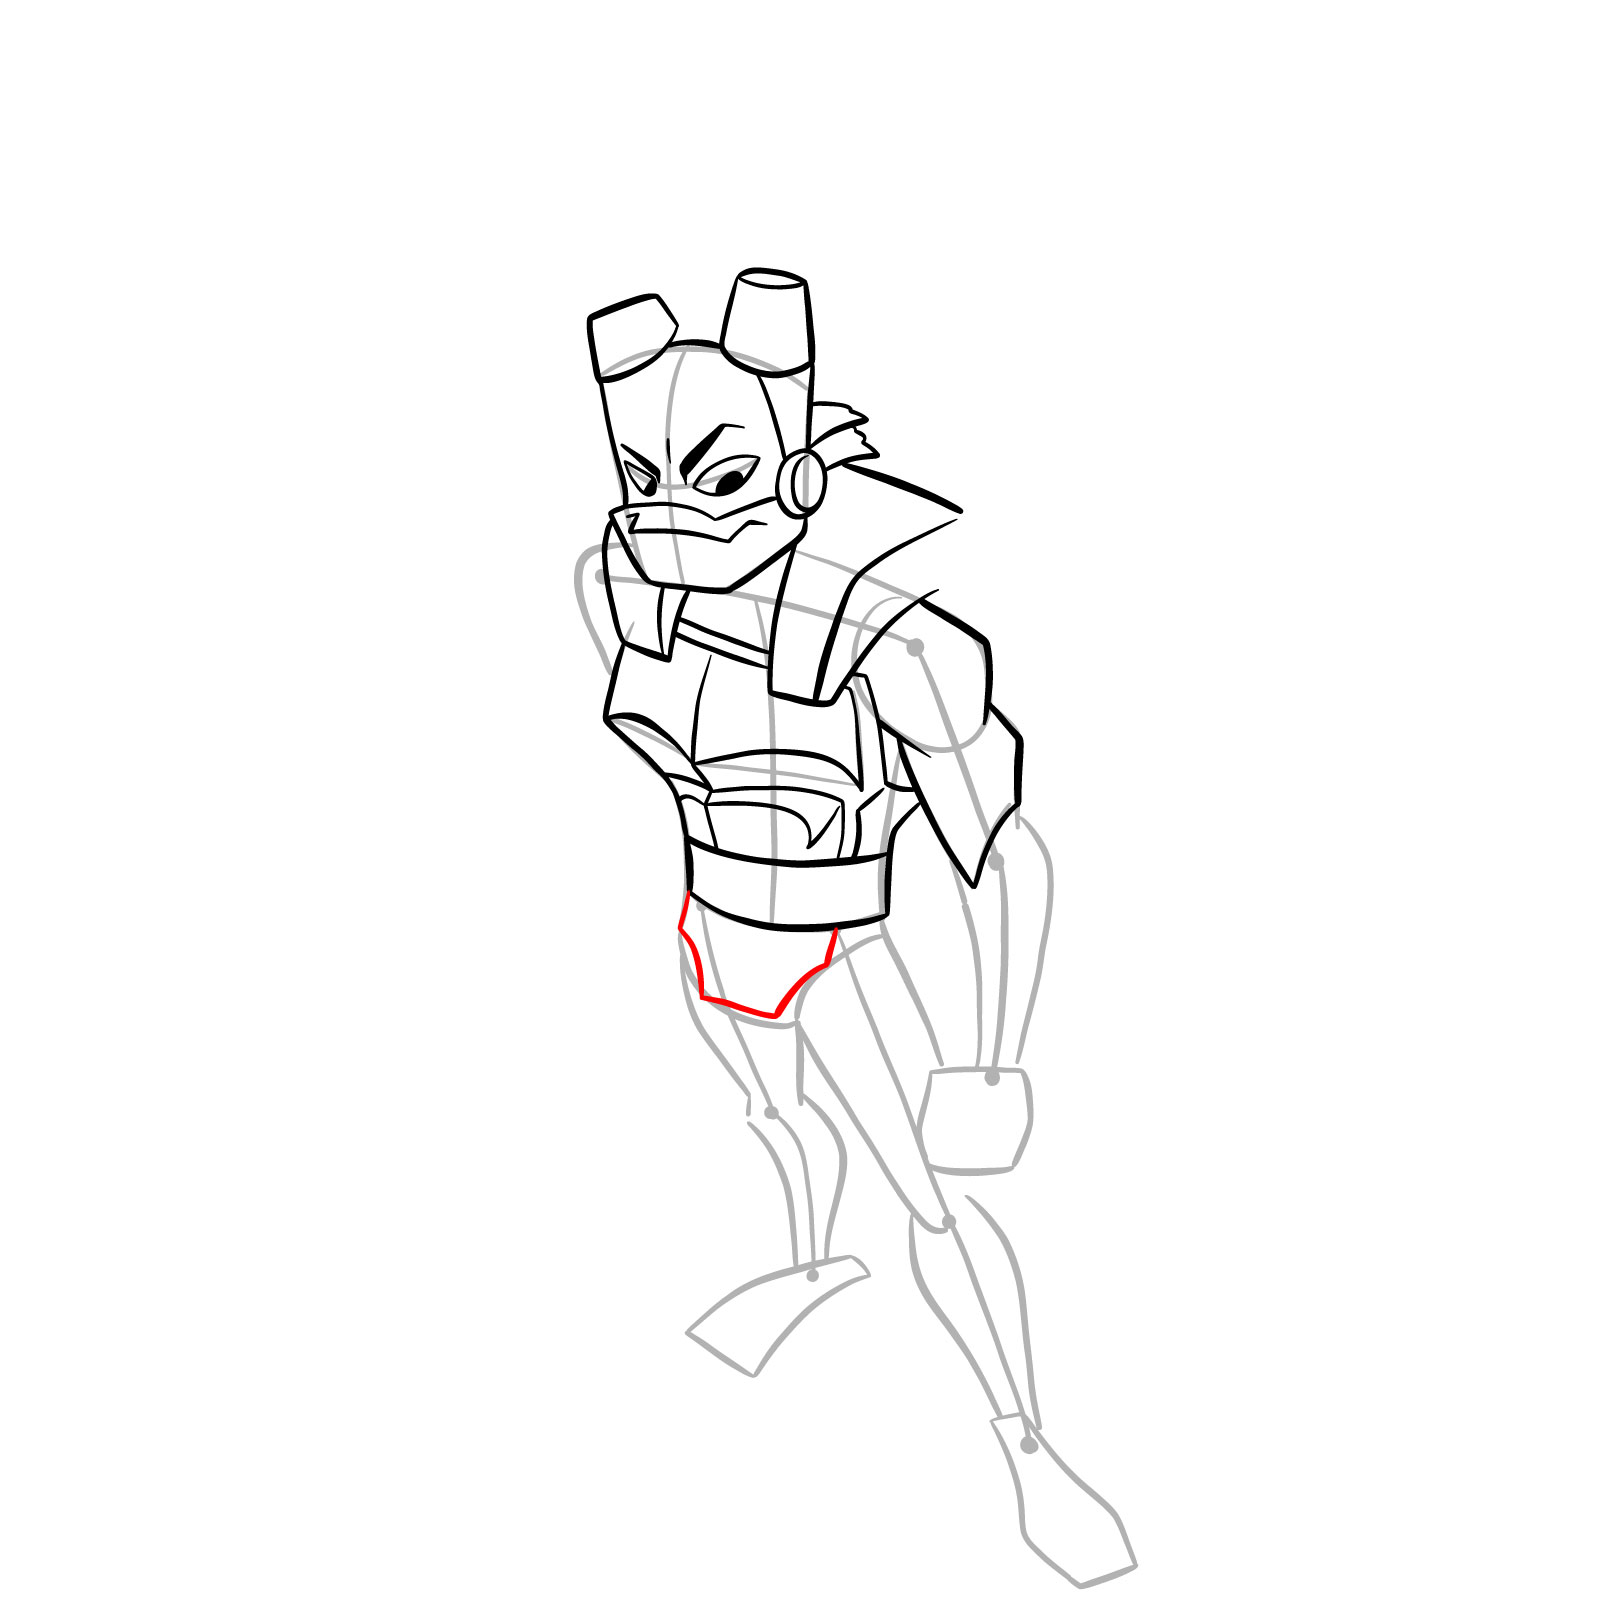 How to draw Donnie in Hamato Ninpō state - step 20